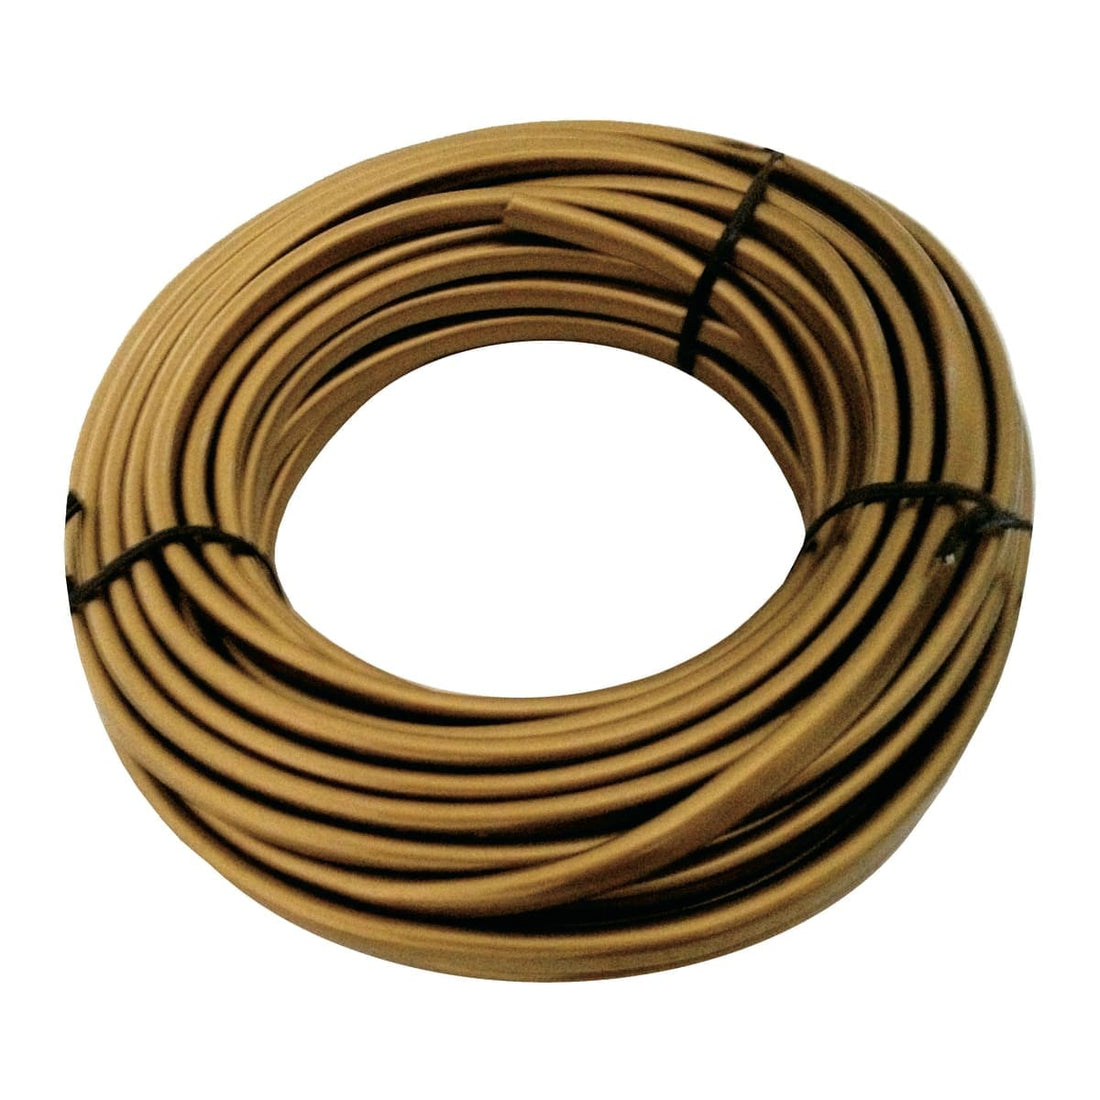 HANK ELECTRICAL CABLE H03VVH2F 2X0,75 10MT GOLD - best price from Maltashopper.com BR420200087